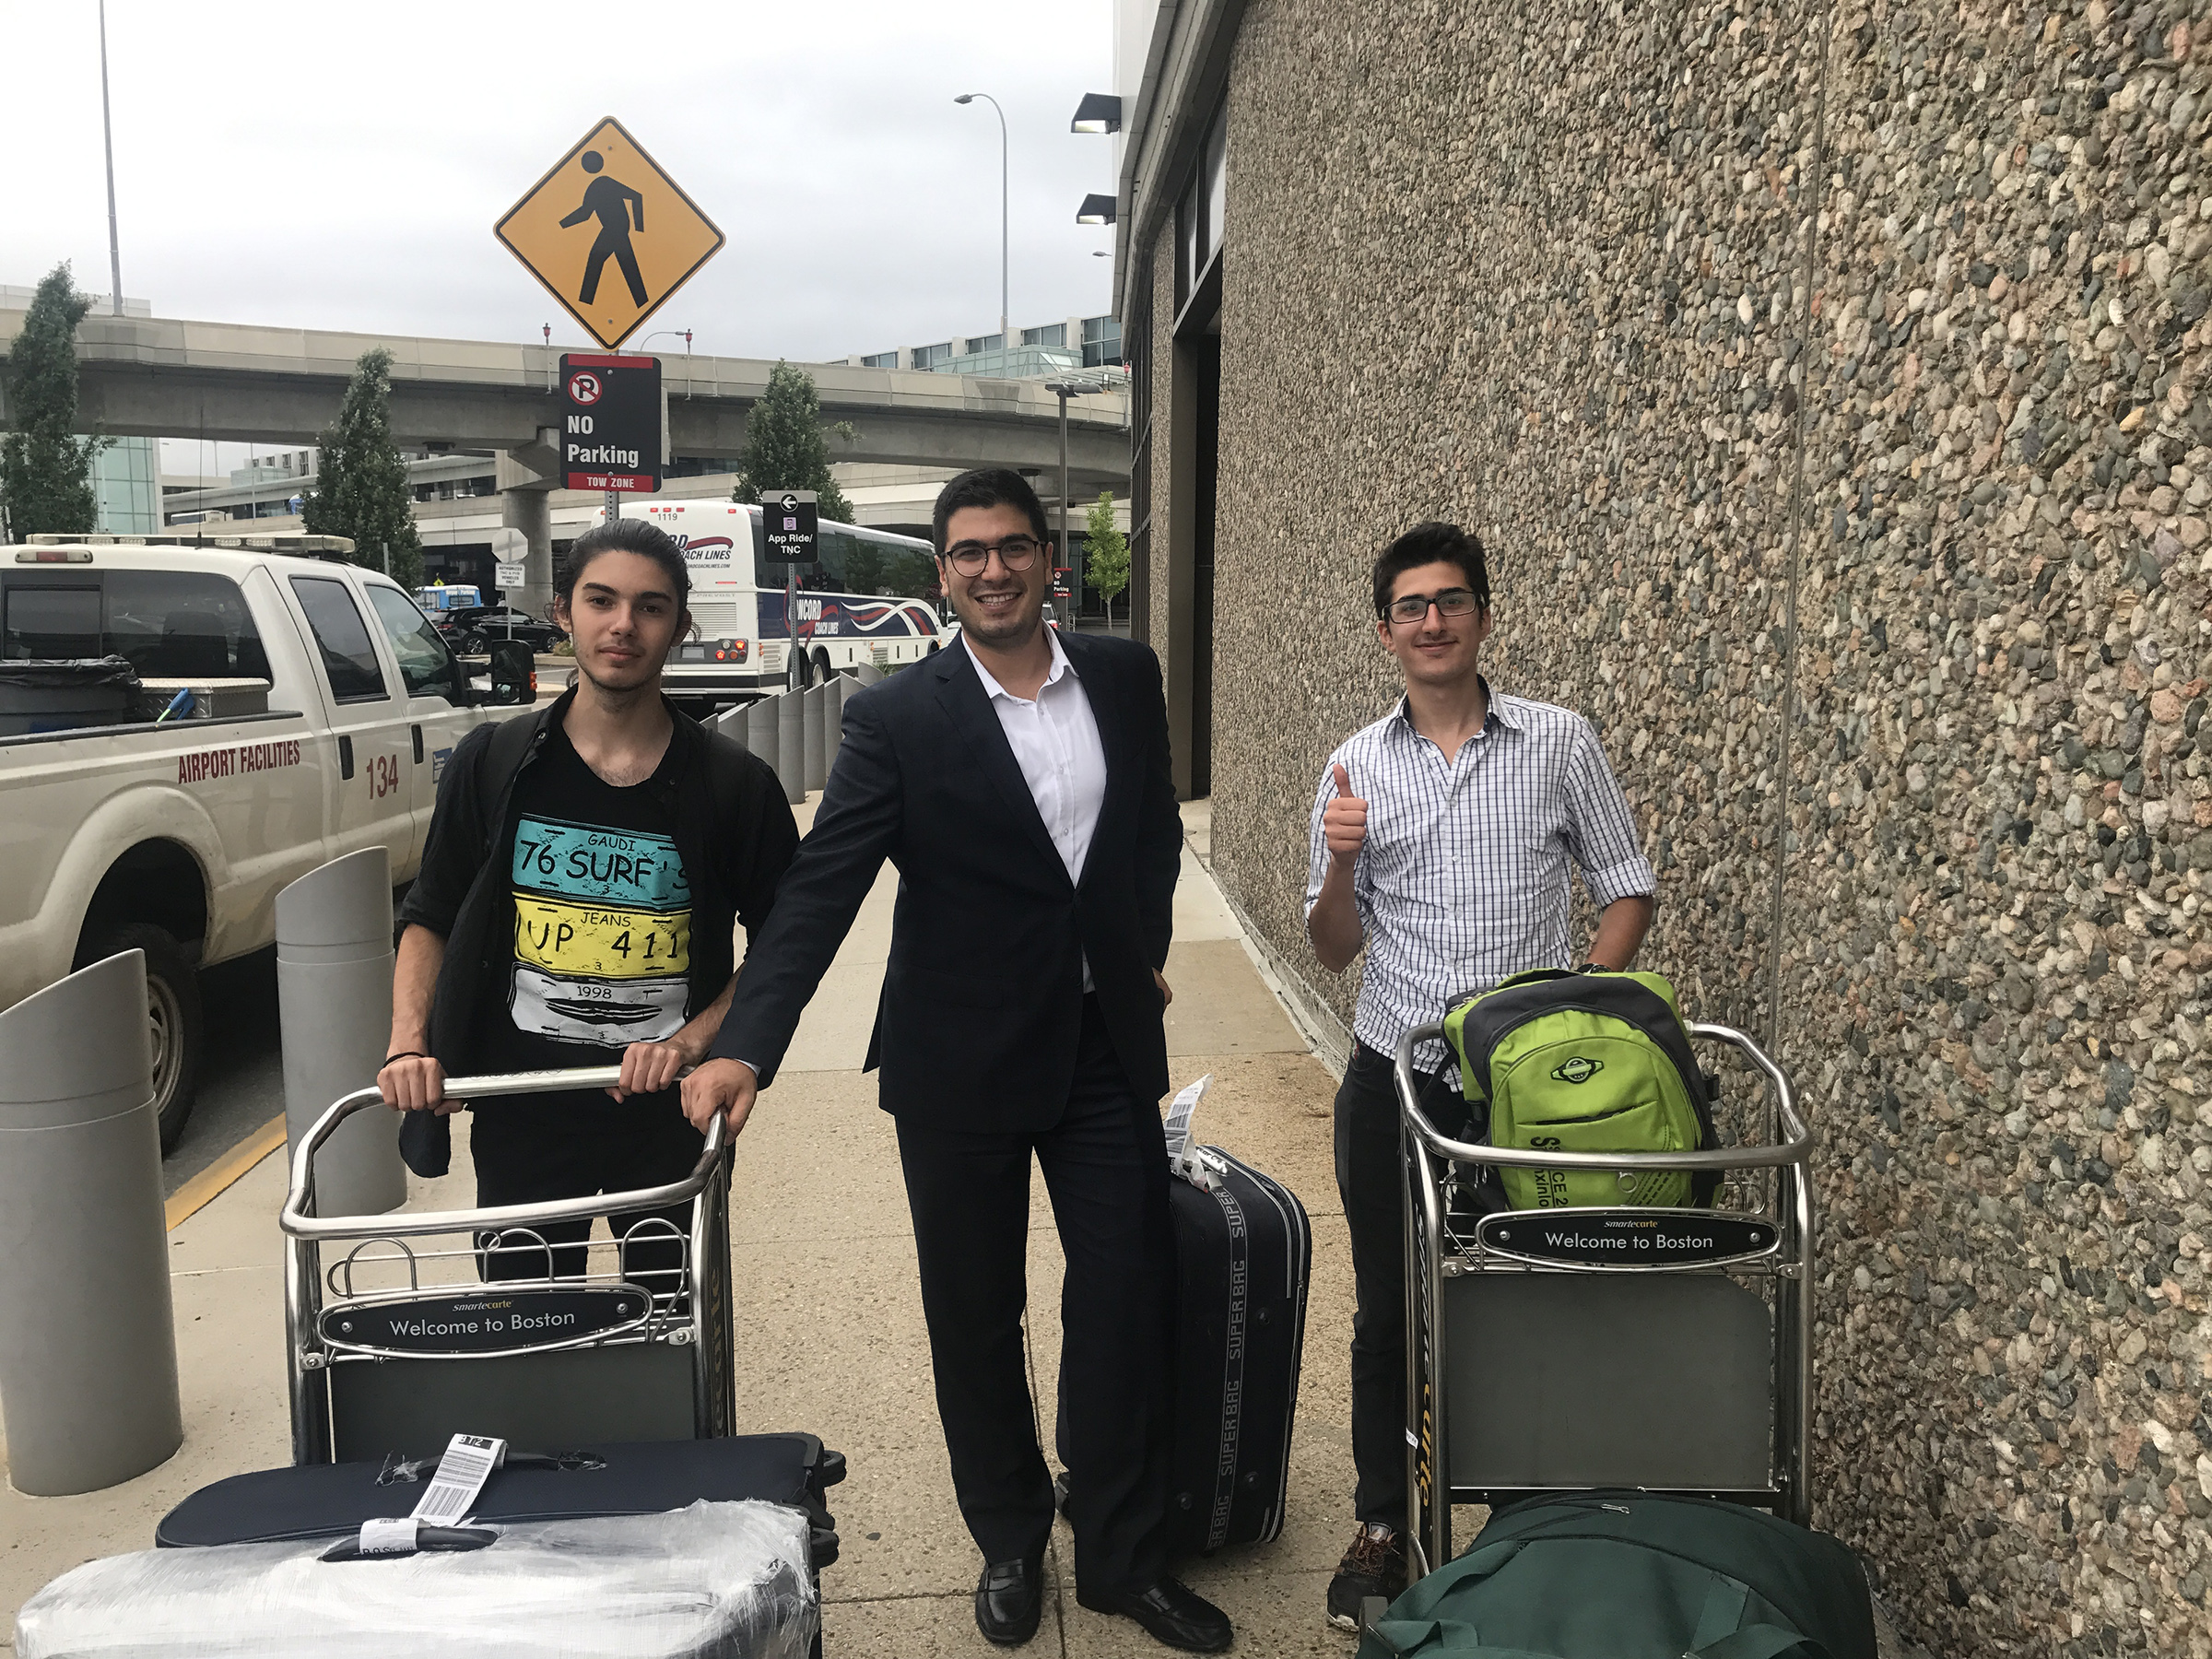 George Batah picking up Nabil Khalil from Aleppo and Hussam Salhab from Damascus at Logan Airport in Boston, on Aug. 18, 2017. (Courtesy of George Batah)